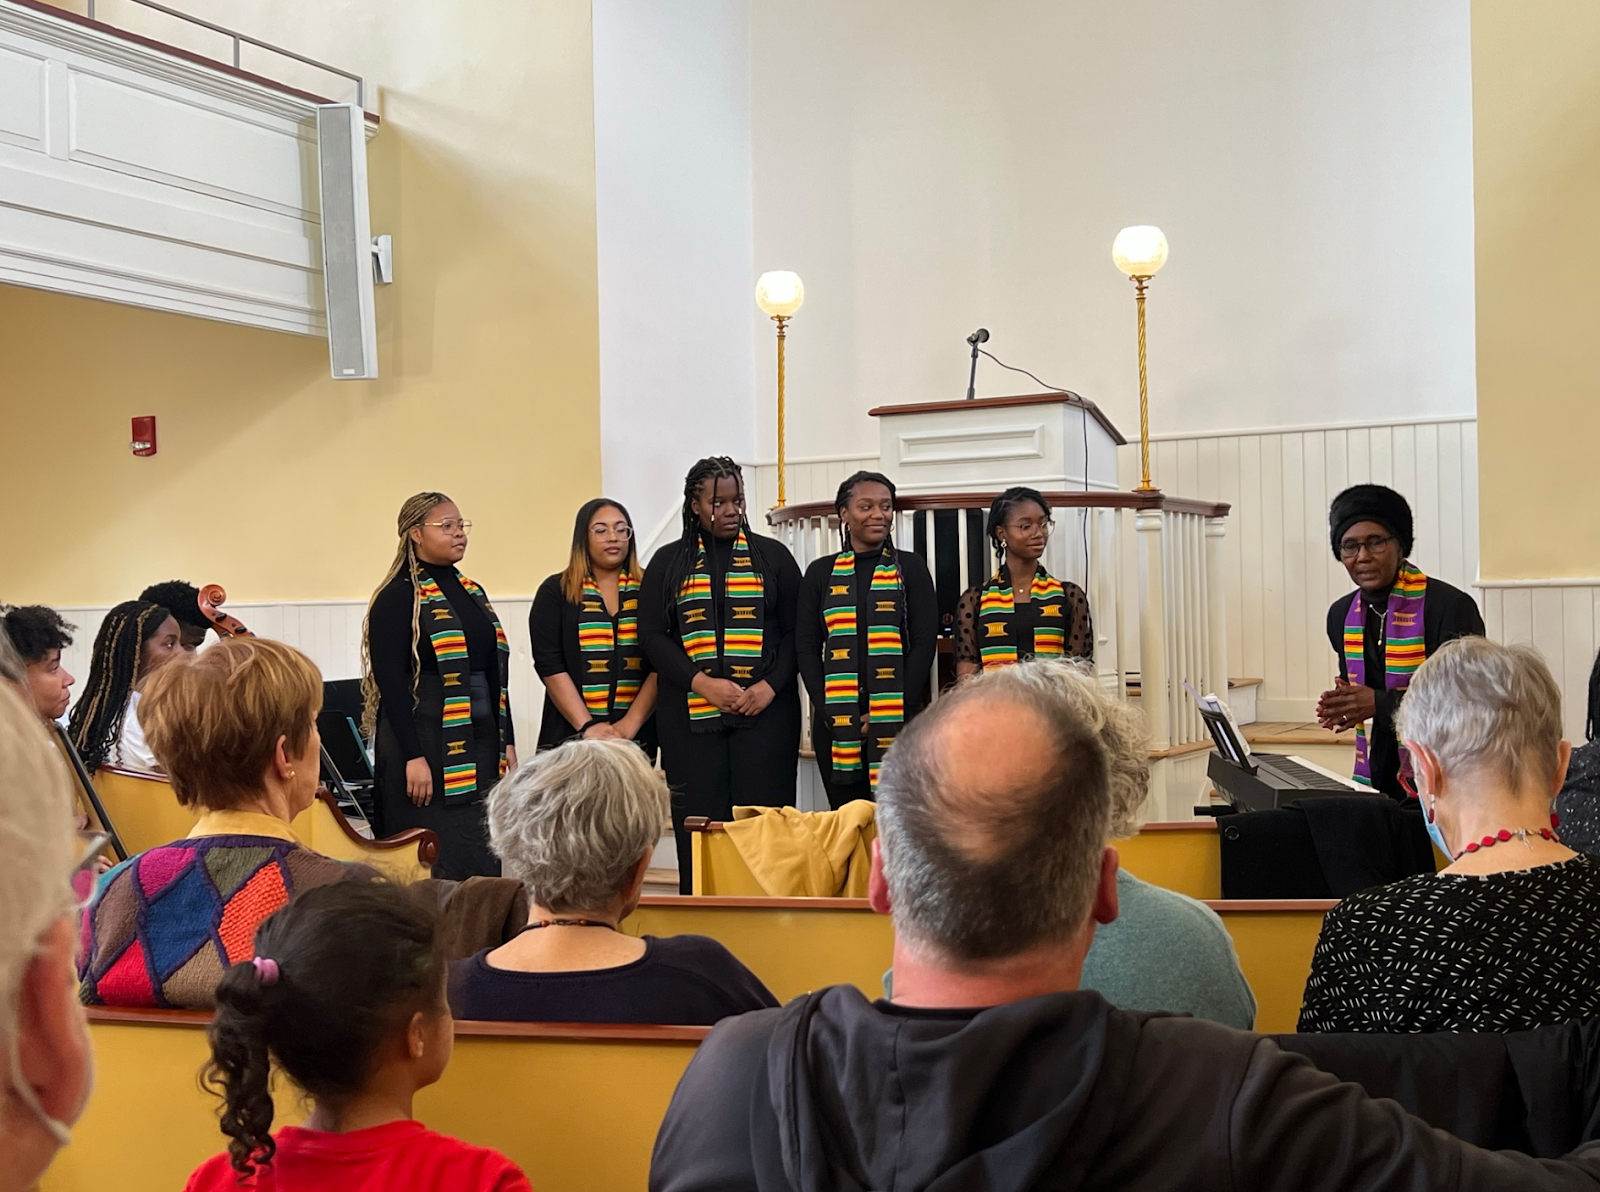 At the musical event on Oct. 15, Wellesley College’s Harambee Singing Group performed a medley led by the choir’s director Linda Brown. 